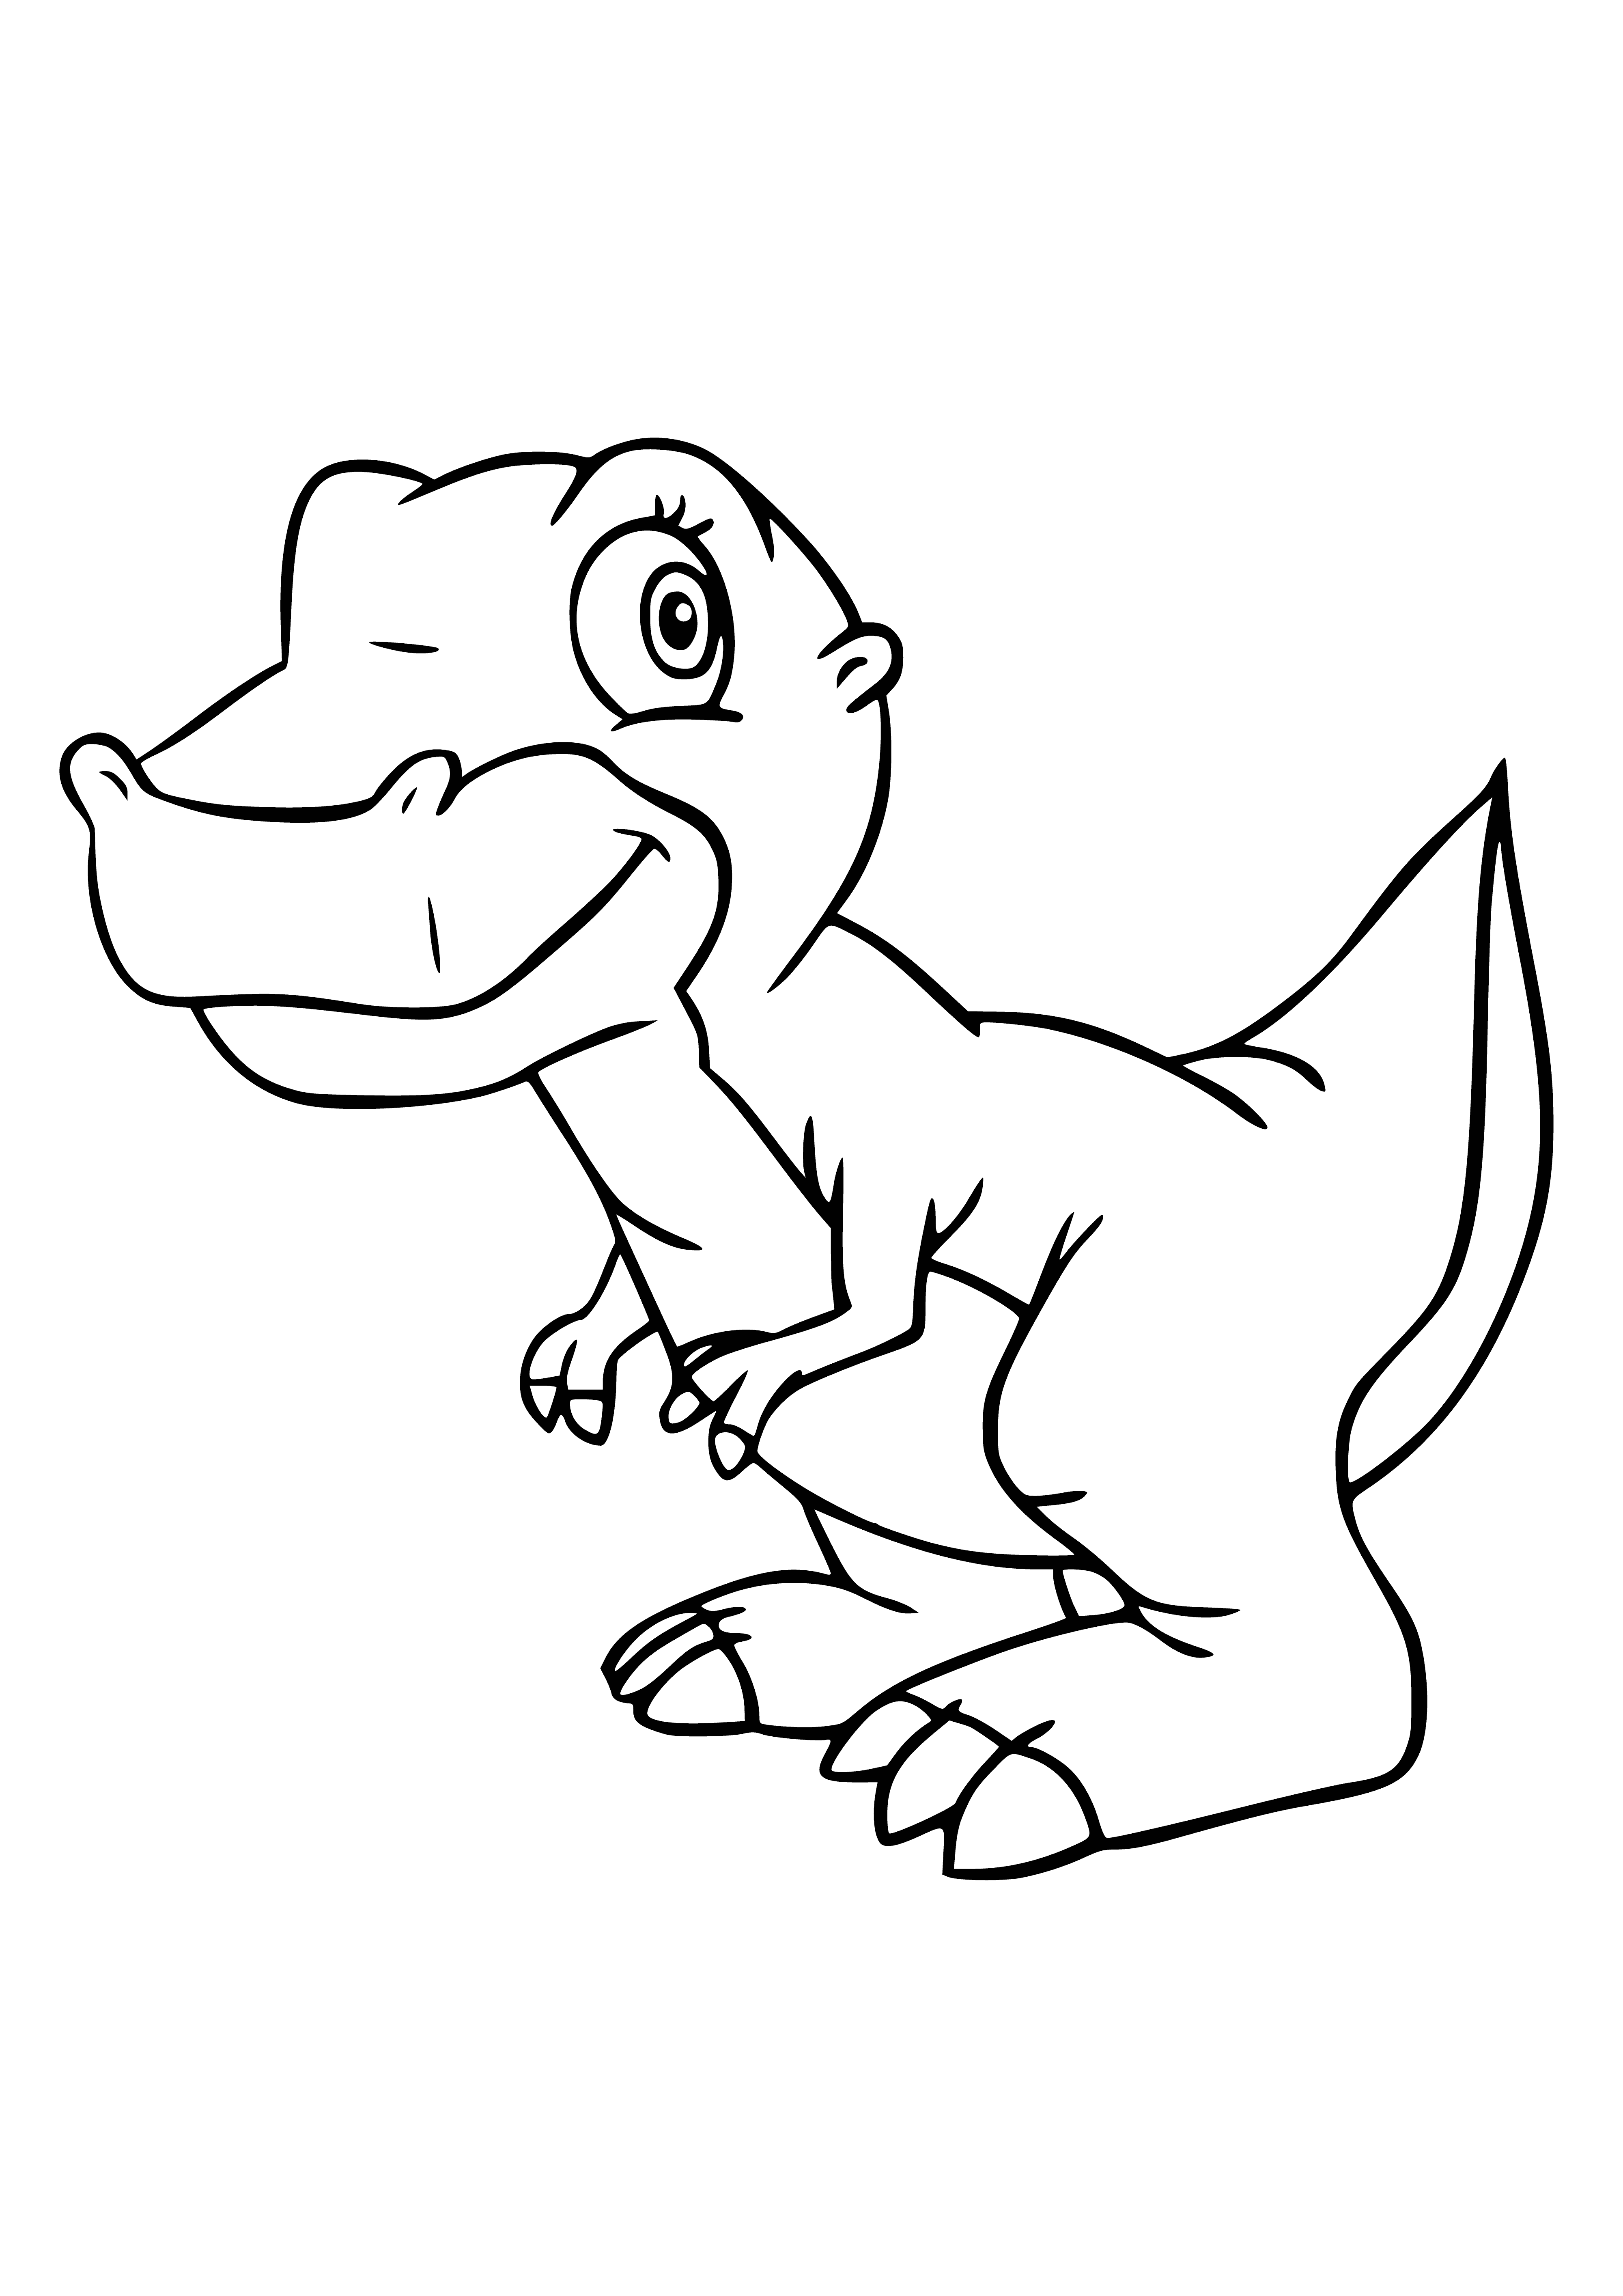 coloring page: Two dinosaurs, one big & green, one small & blue; both have spikes down their backs.